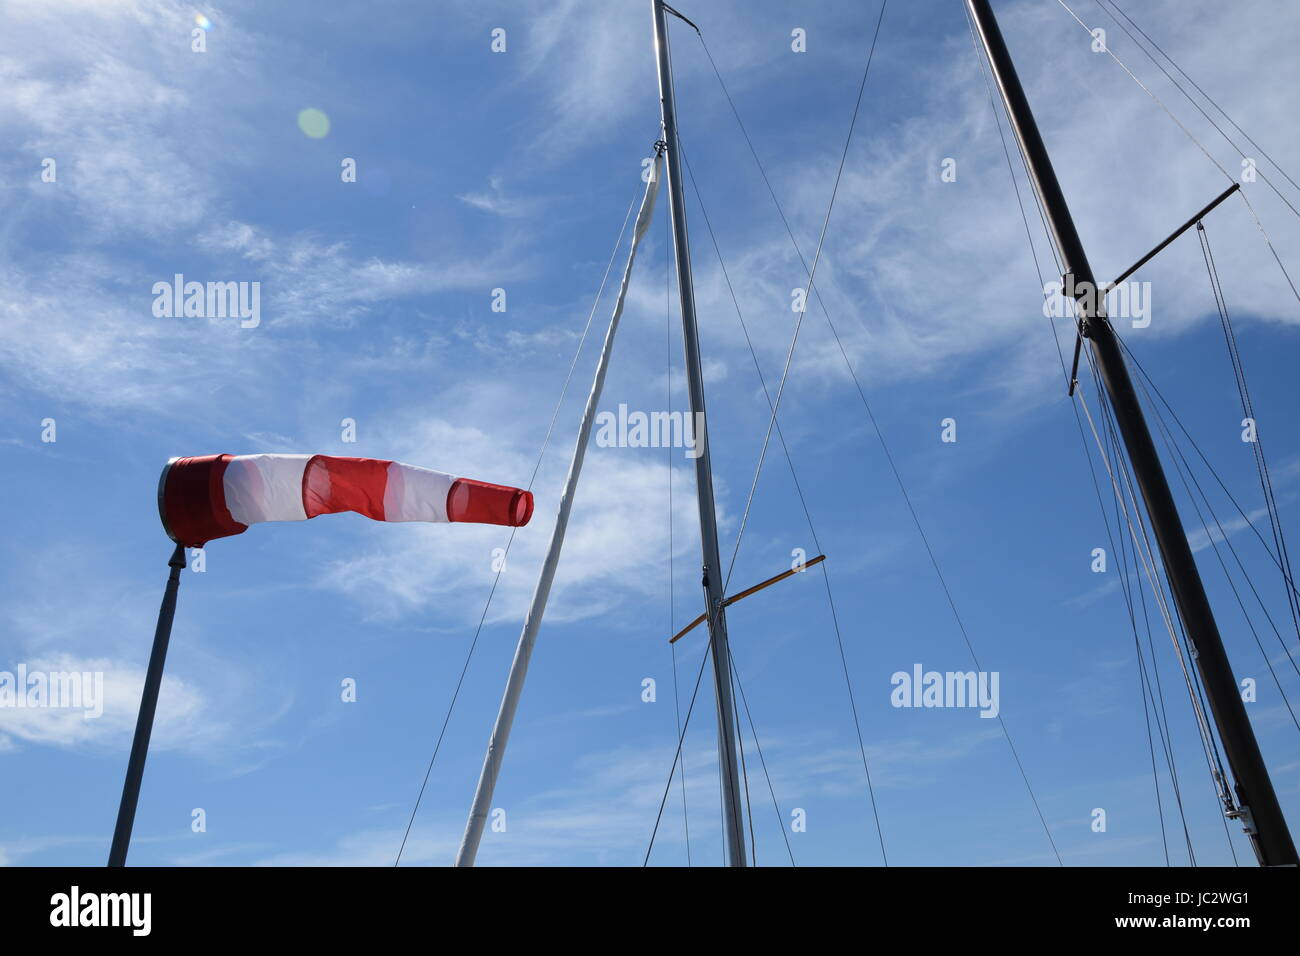 Windsock and yacht masts against blue sky with white clouds Stock Photo